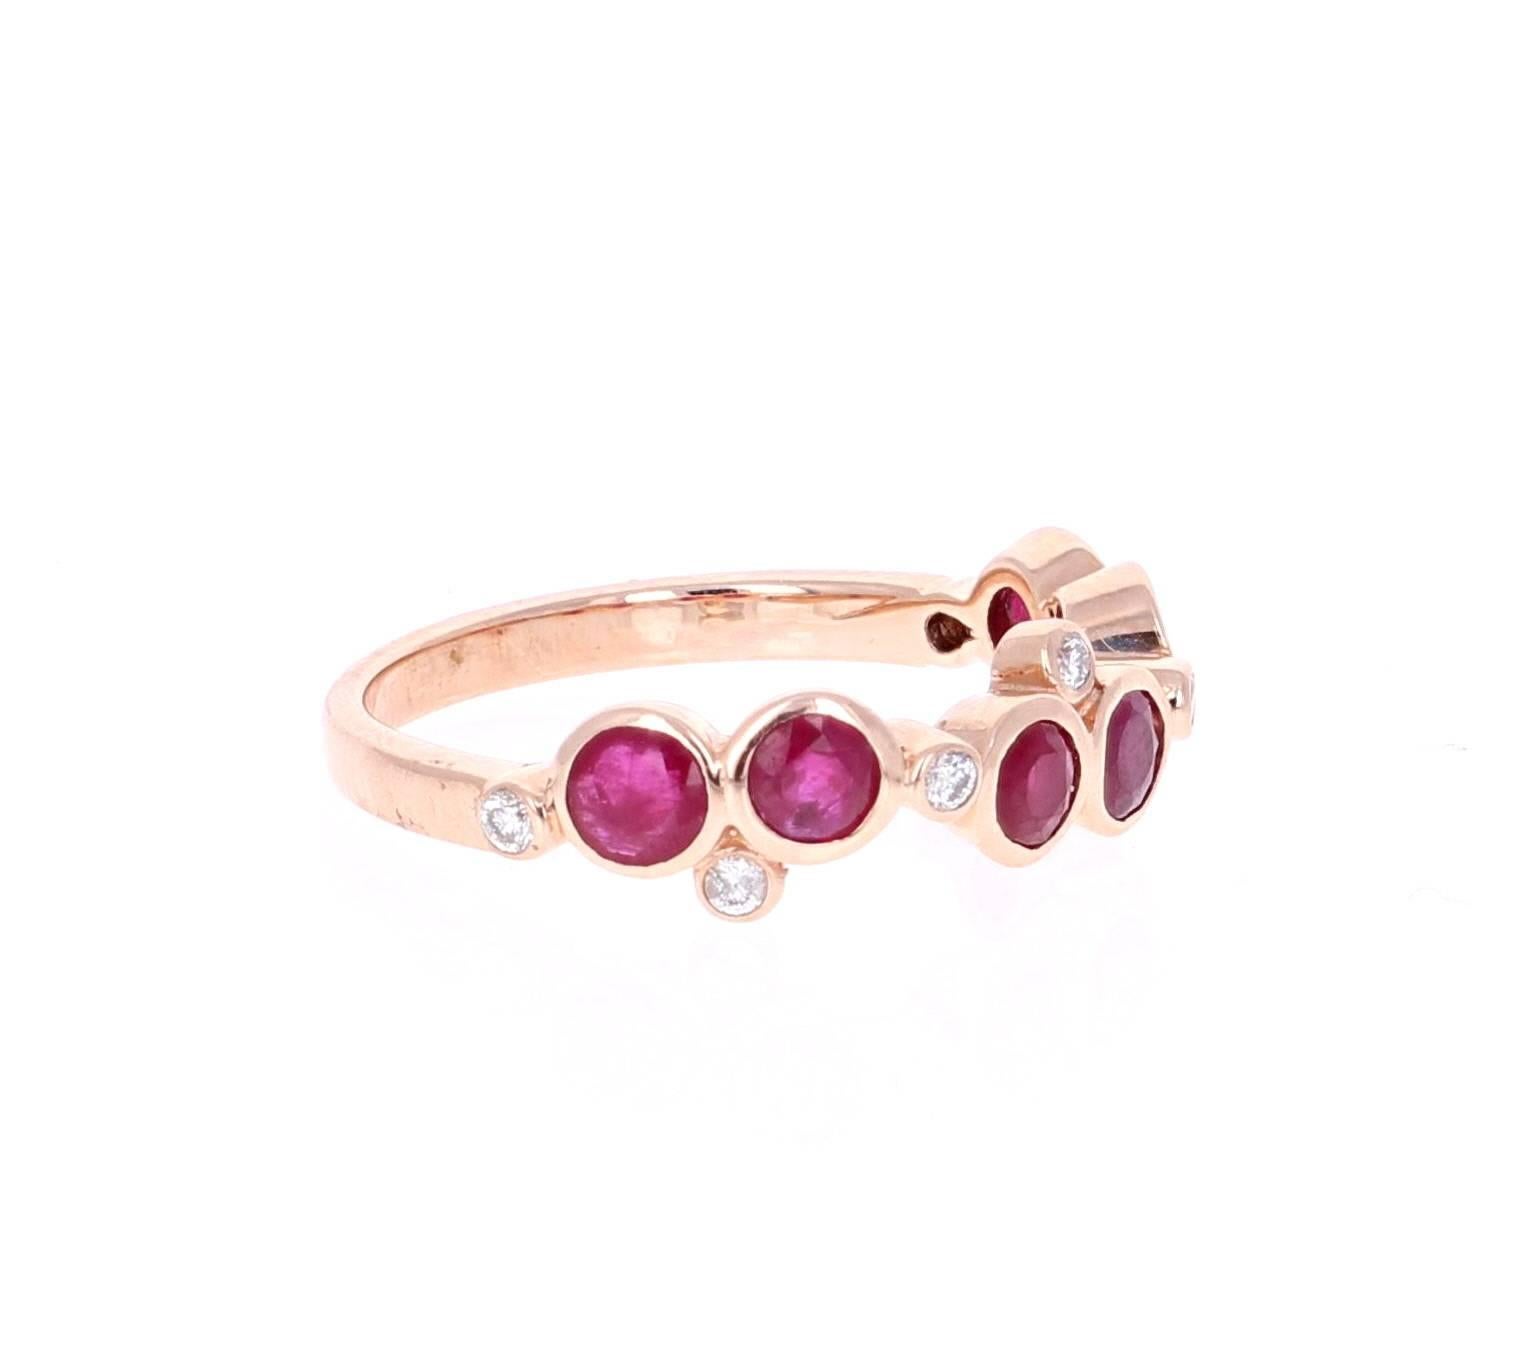 Cute and dainty Ruby and Diamond band that is sure to be a great addition to anyone's accessory collection.   There are 6 Round Cut Rubies that weigh 1.06 carats and 7 Round Cut Diamonds that weigh 0.10 carats.  The total carat weight of the band is